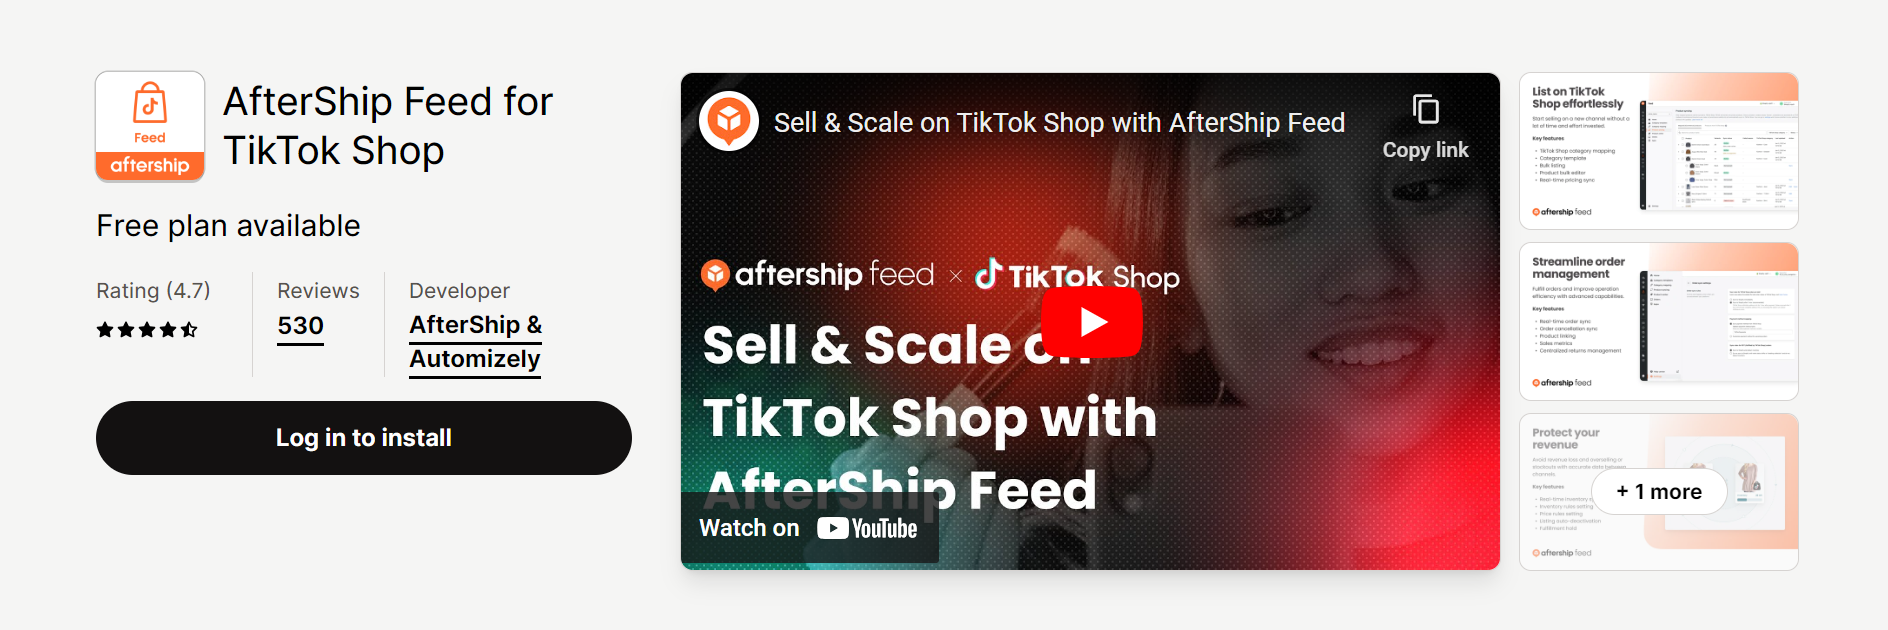 AfterShip Feed for TikTok Shop